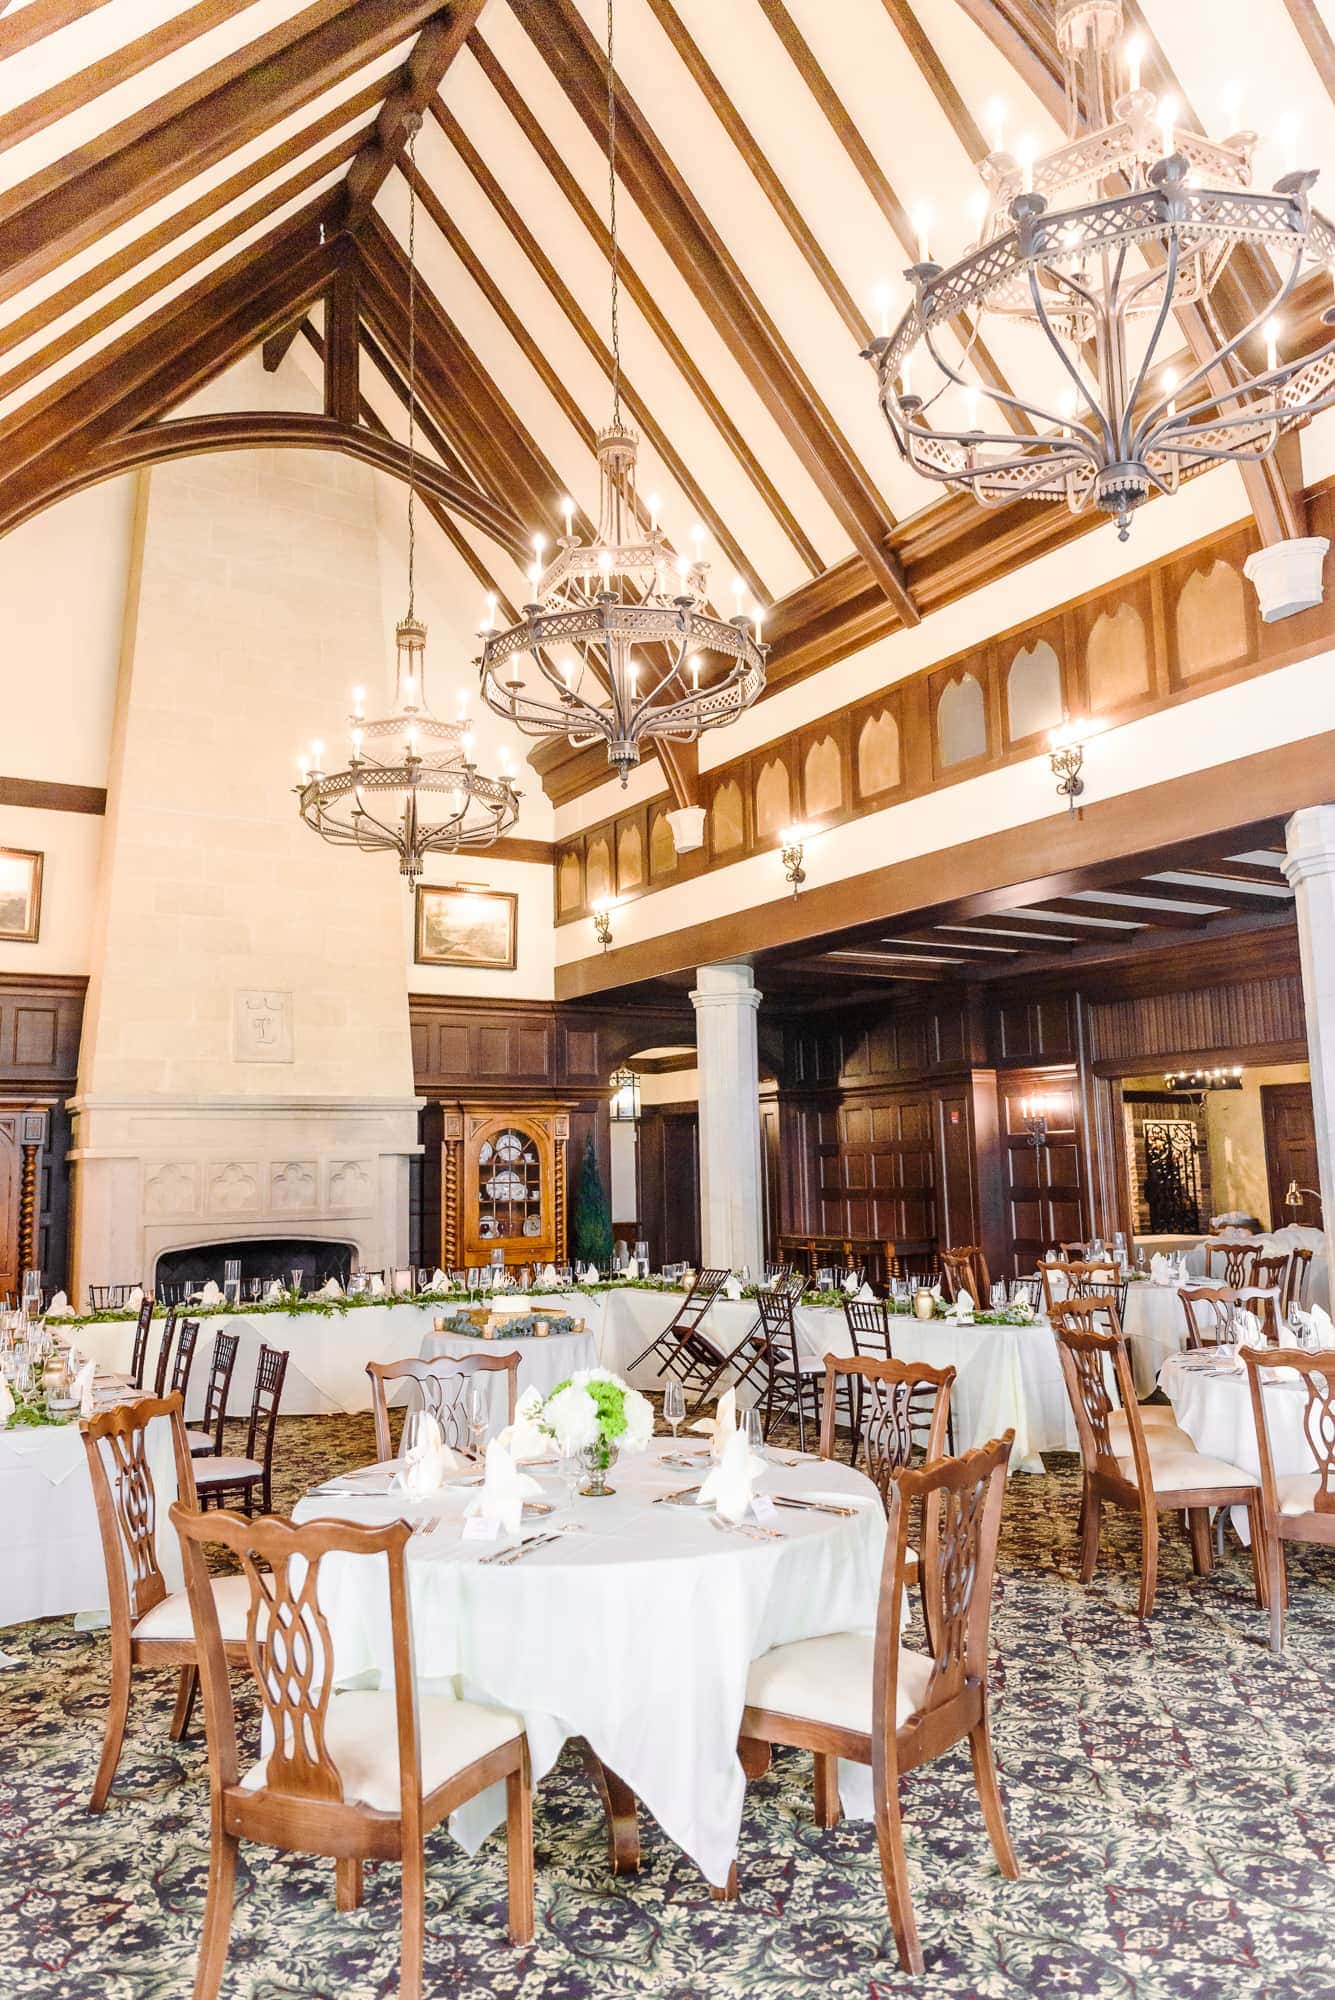 The main reception hall at the Longview Country Club in Charlotte looks like an elegant Tudor mansion with exposed ceiling beams.